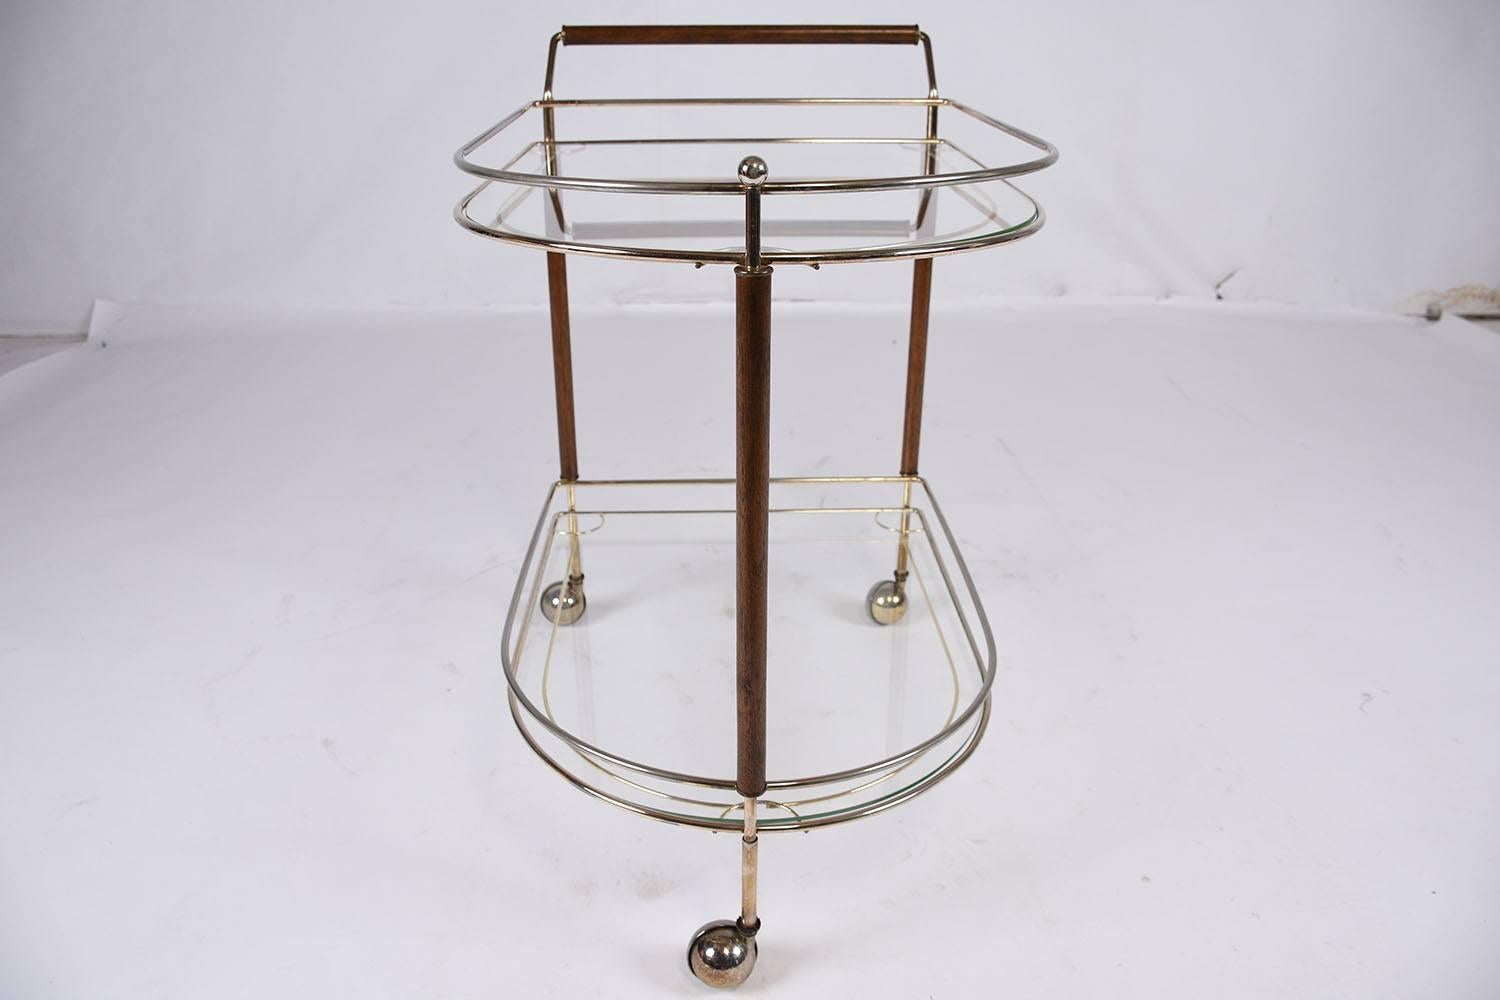 This 1960s Vintage Mid-Century Modern-style serving cart features a two-tier brass frame. Each tier is simply designed with a simple rail and glass bottom. The vertical poles and handle accent the brass base with teakwood finished a rich walnut